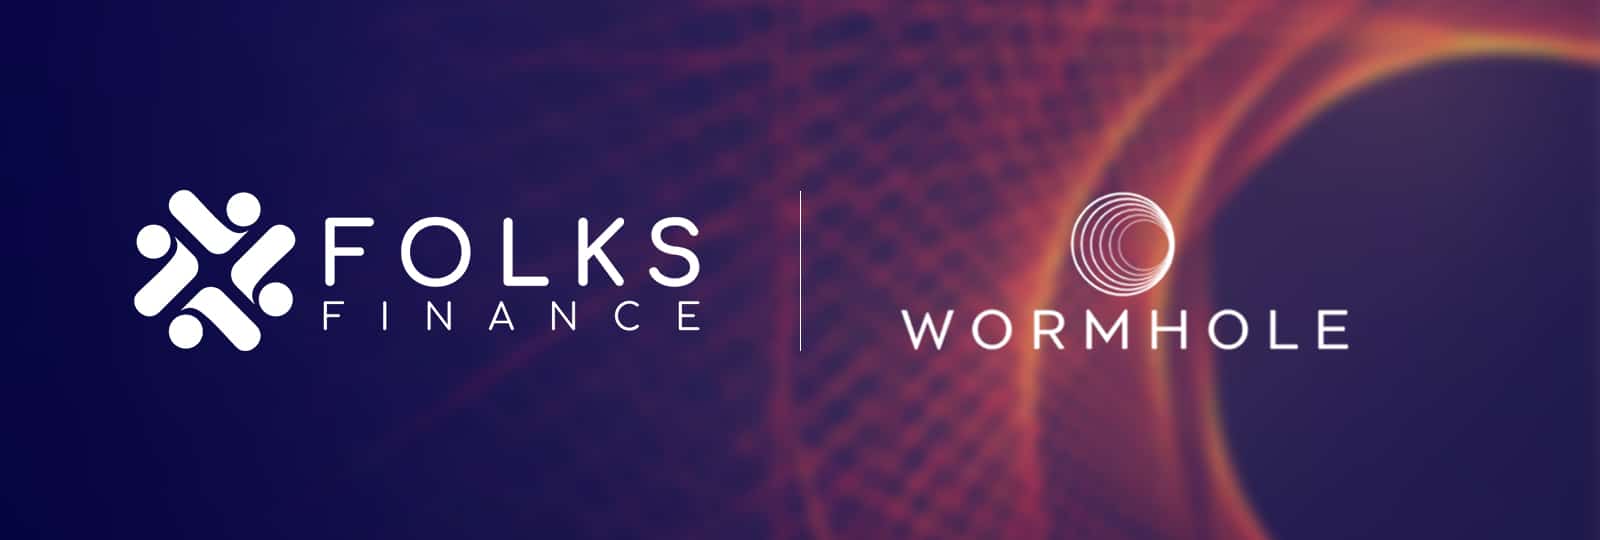 Folks Finance partners with Wormhole for Multichain DeFi Expansion